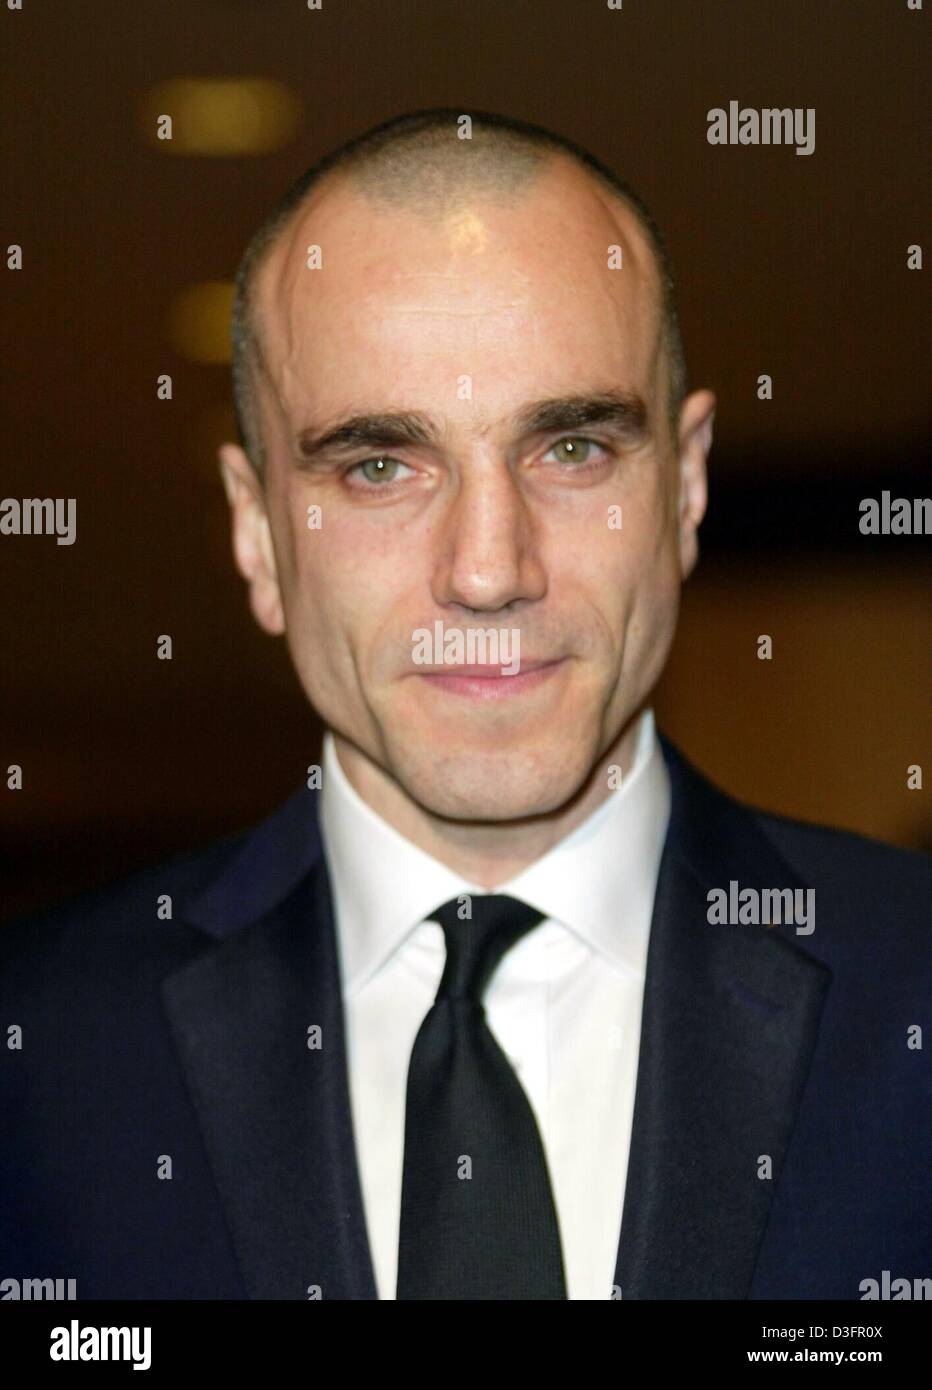 (dpa) - Irish actor Daniel Day-Lewis ('Gangs of New York'), one of the presenters of the DGA awards, poses backstage of the Directors Guild of America (DGA) awards show in Los Angeles, 1 March 2003. Stock Photo